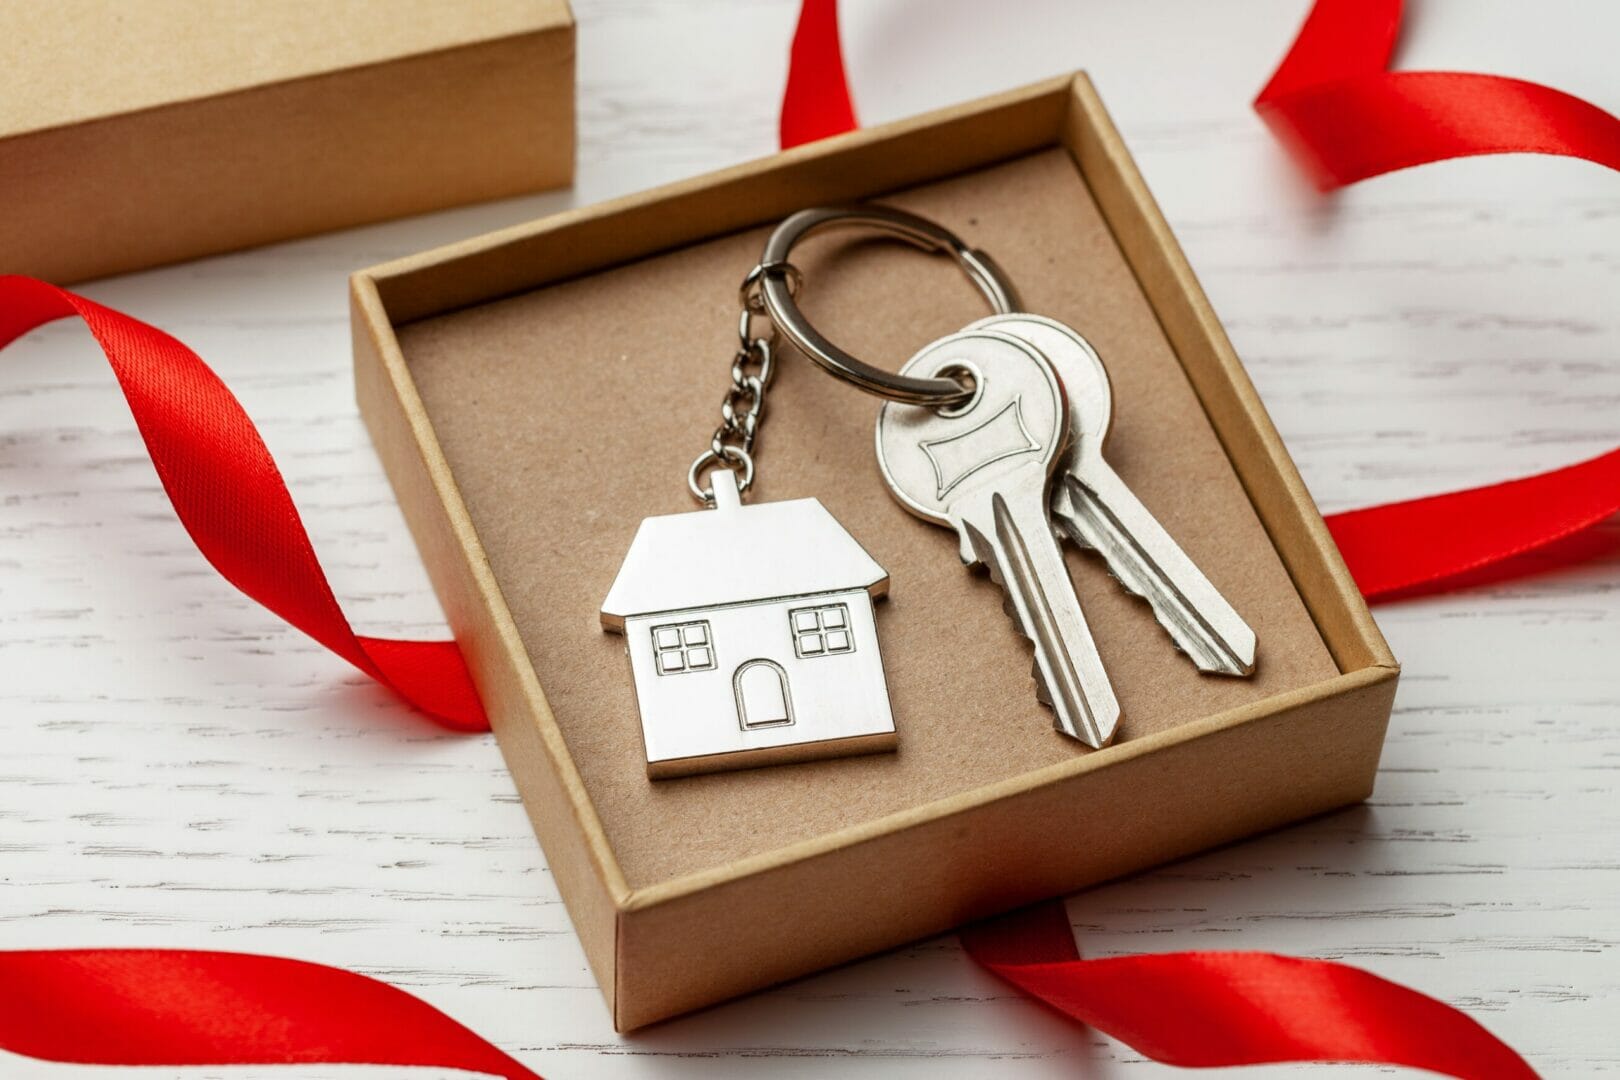 House buyers need to act fast to move before Christmas, encourages leading law firm